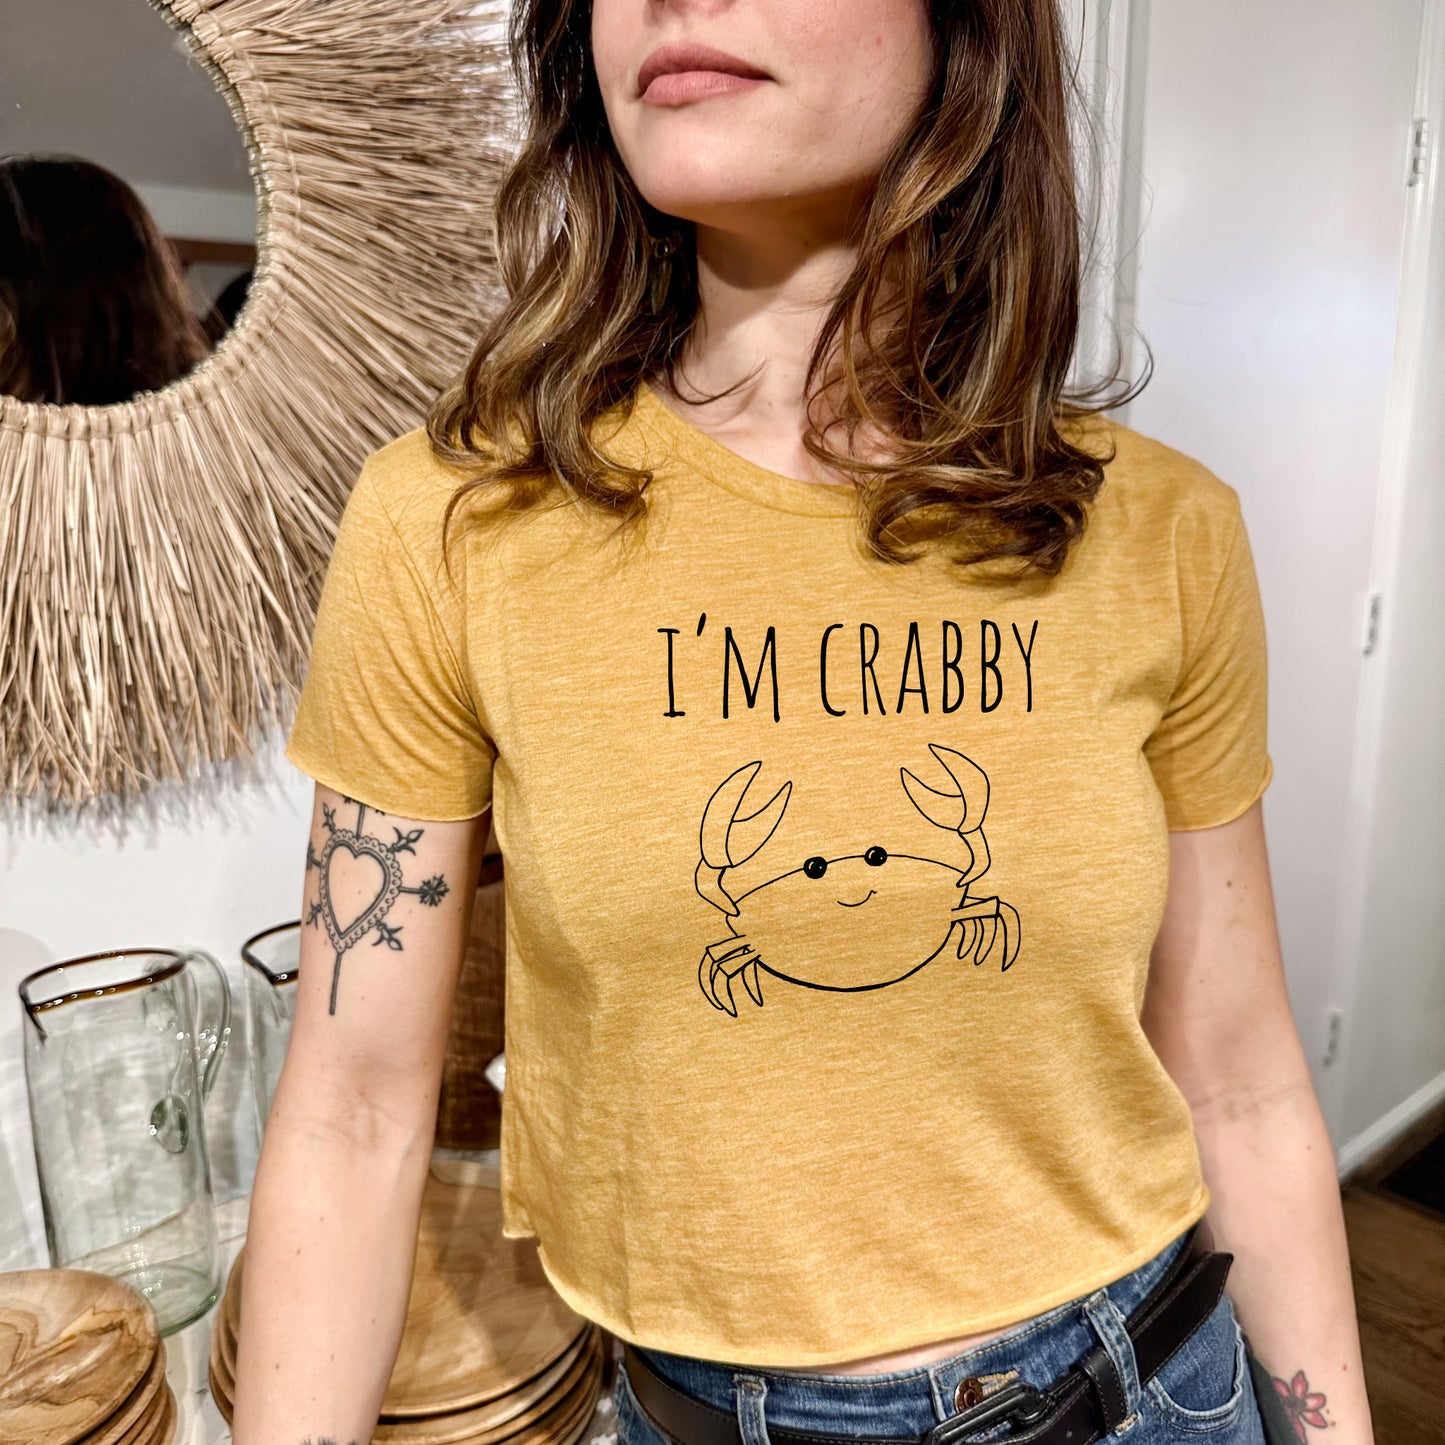 I'm Crabby - Women's Crop Tee - Heather Gray or Gold